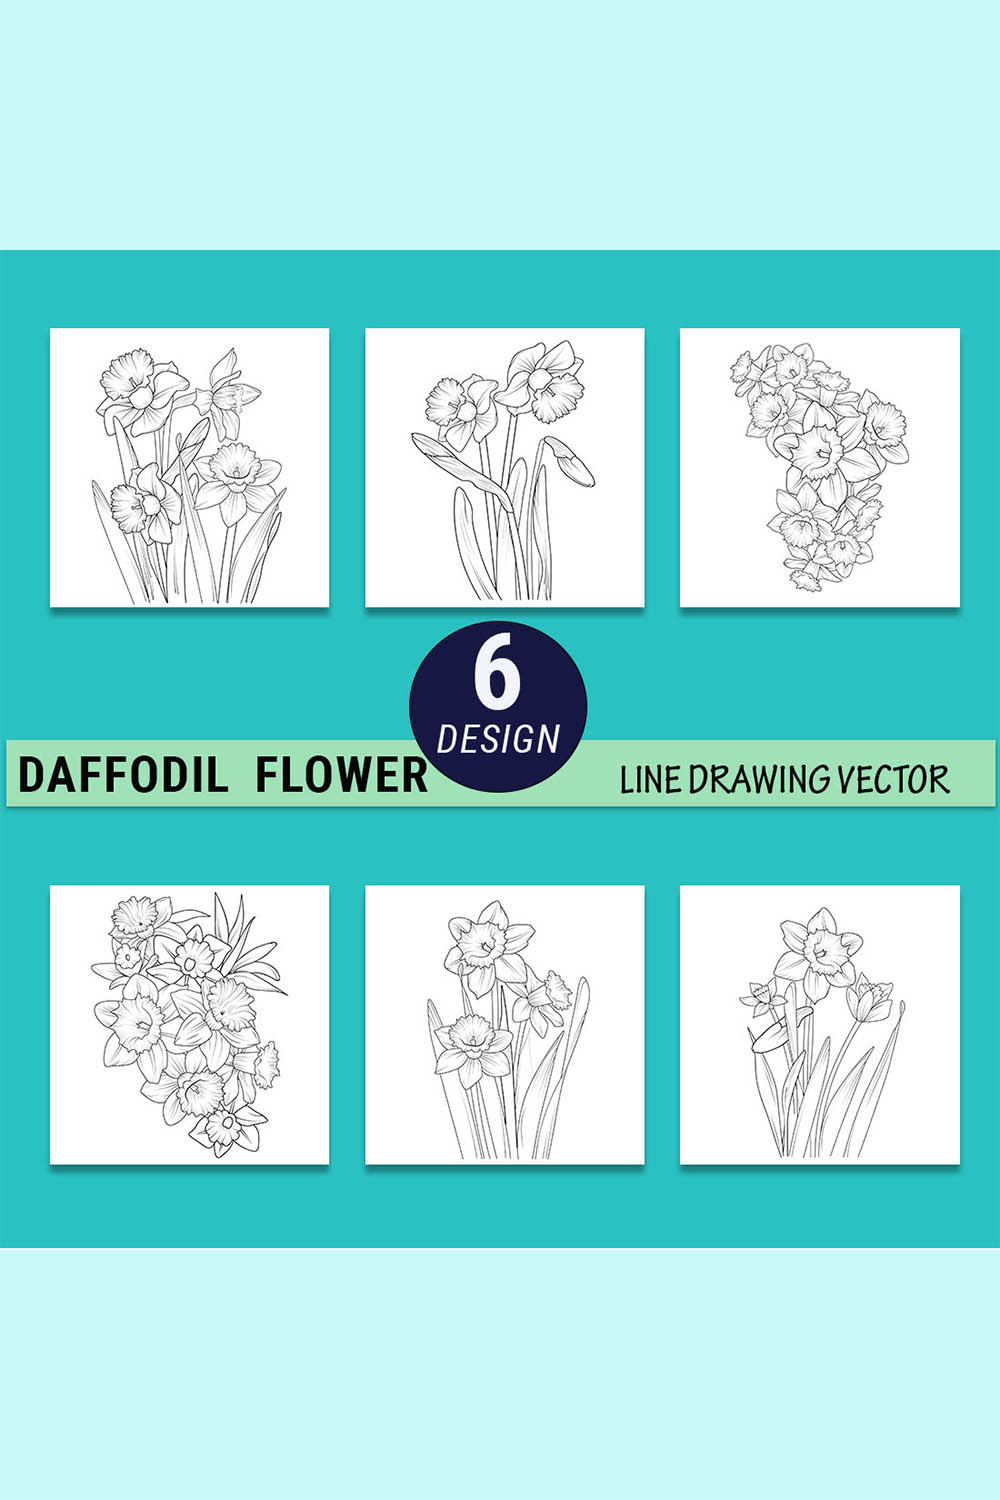 daffodil botanical drawing, hand-drawn botanical daffodil illustrations, daffodil flower doodle art, dahlia line art realistic daffodil flower drawing pinterest preview image.